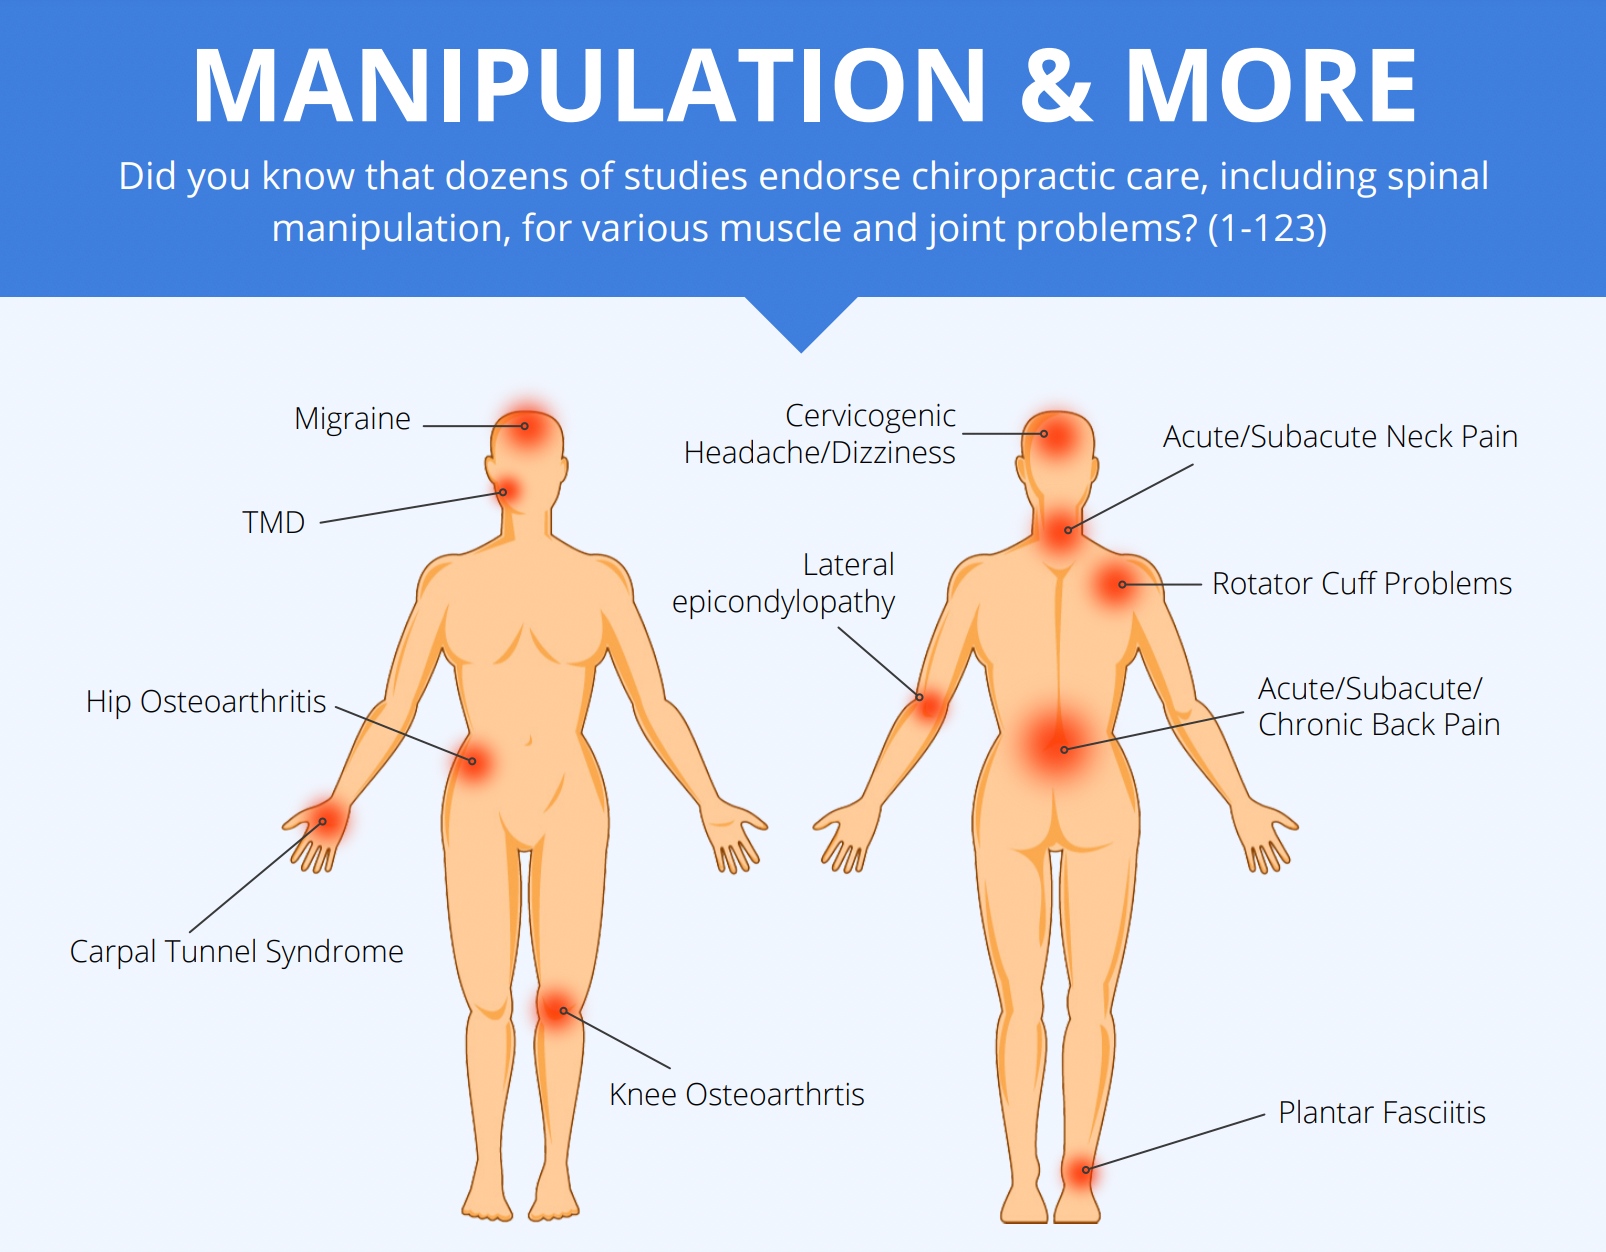 Manipulation and More